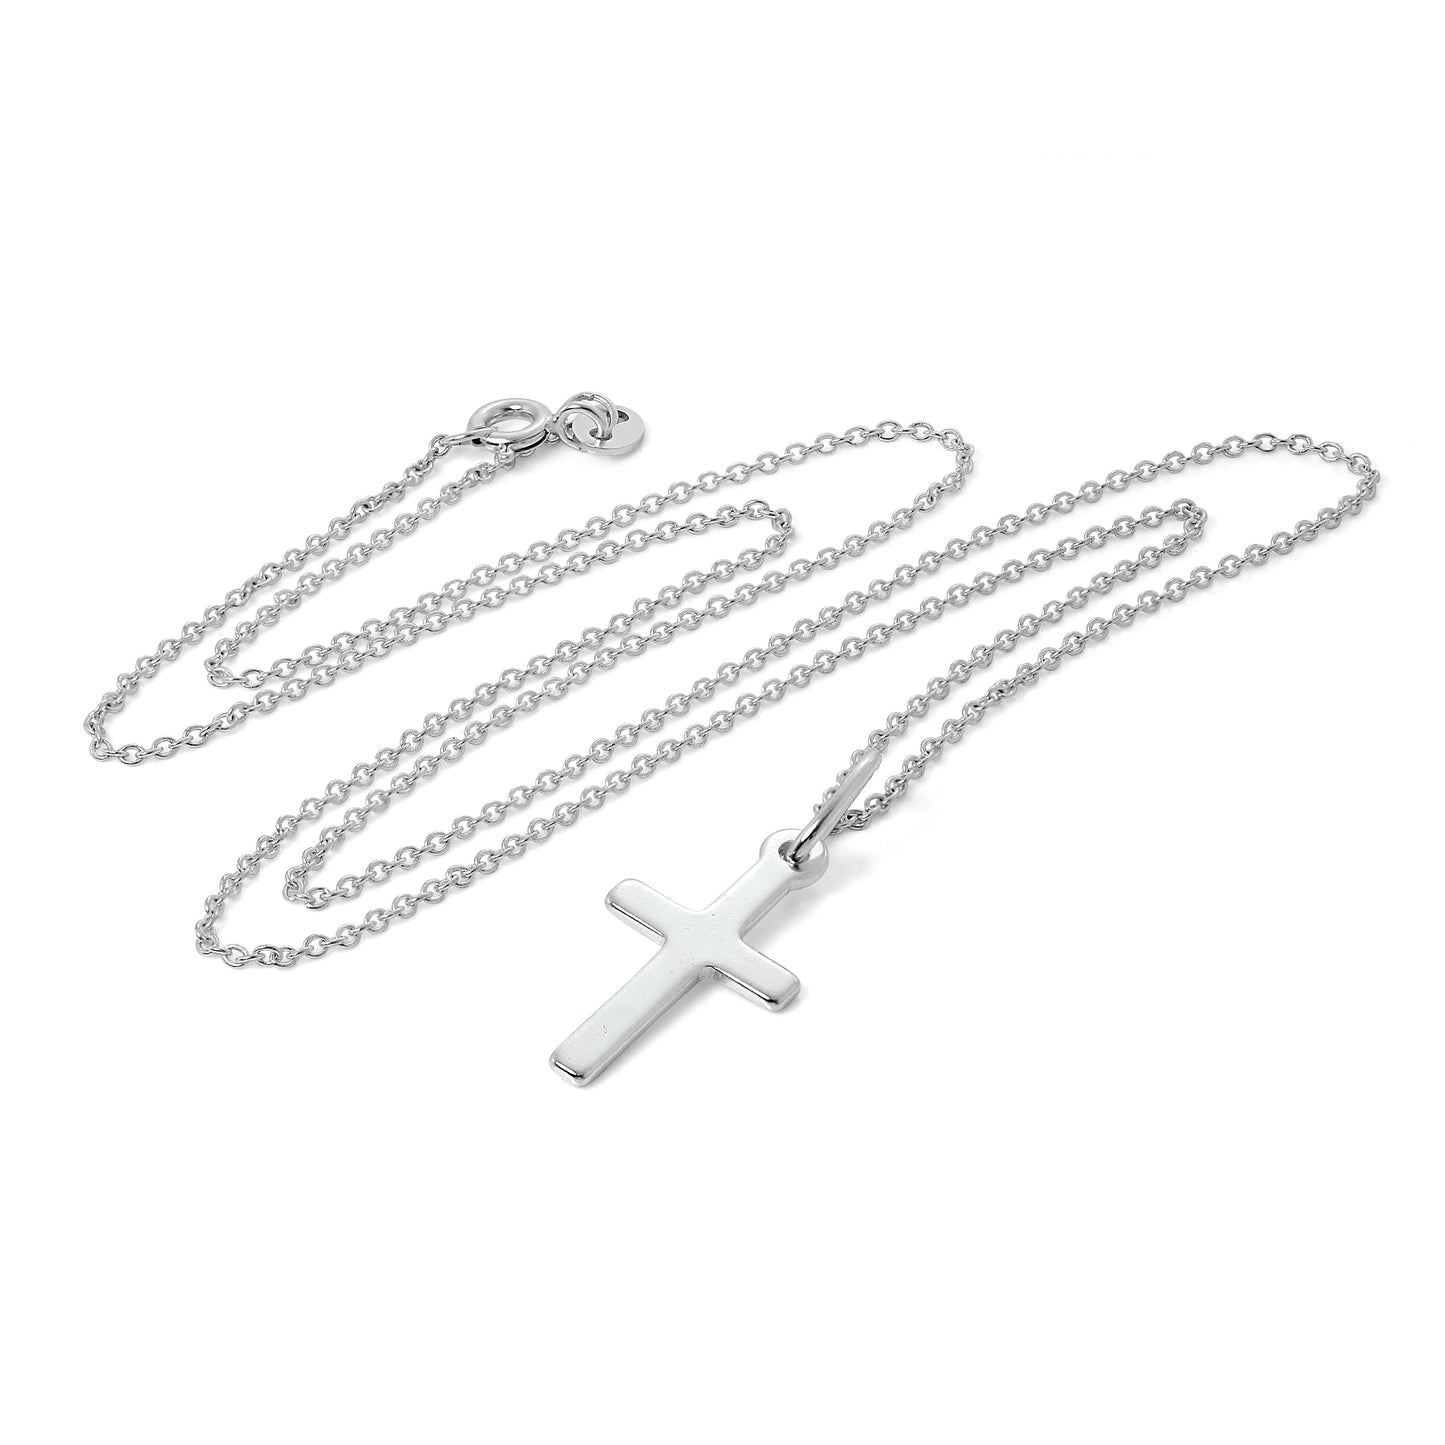 Sterling Silver Plain Cross Pendant Necklace 16 - 22 Inches